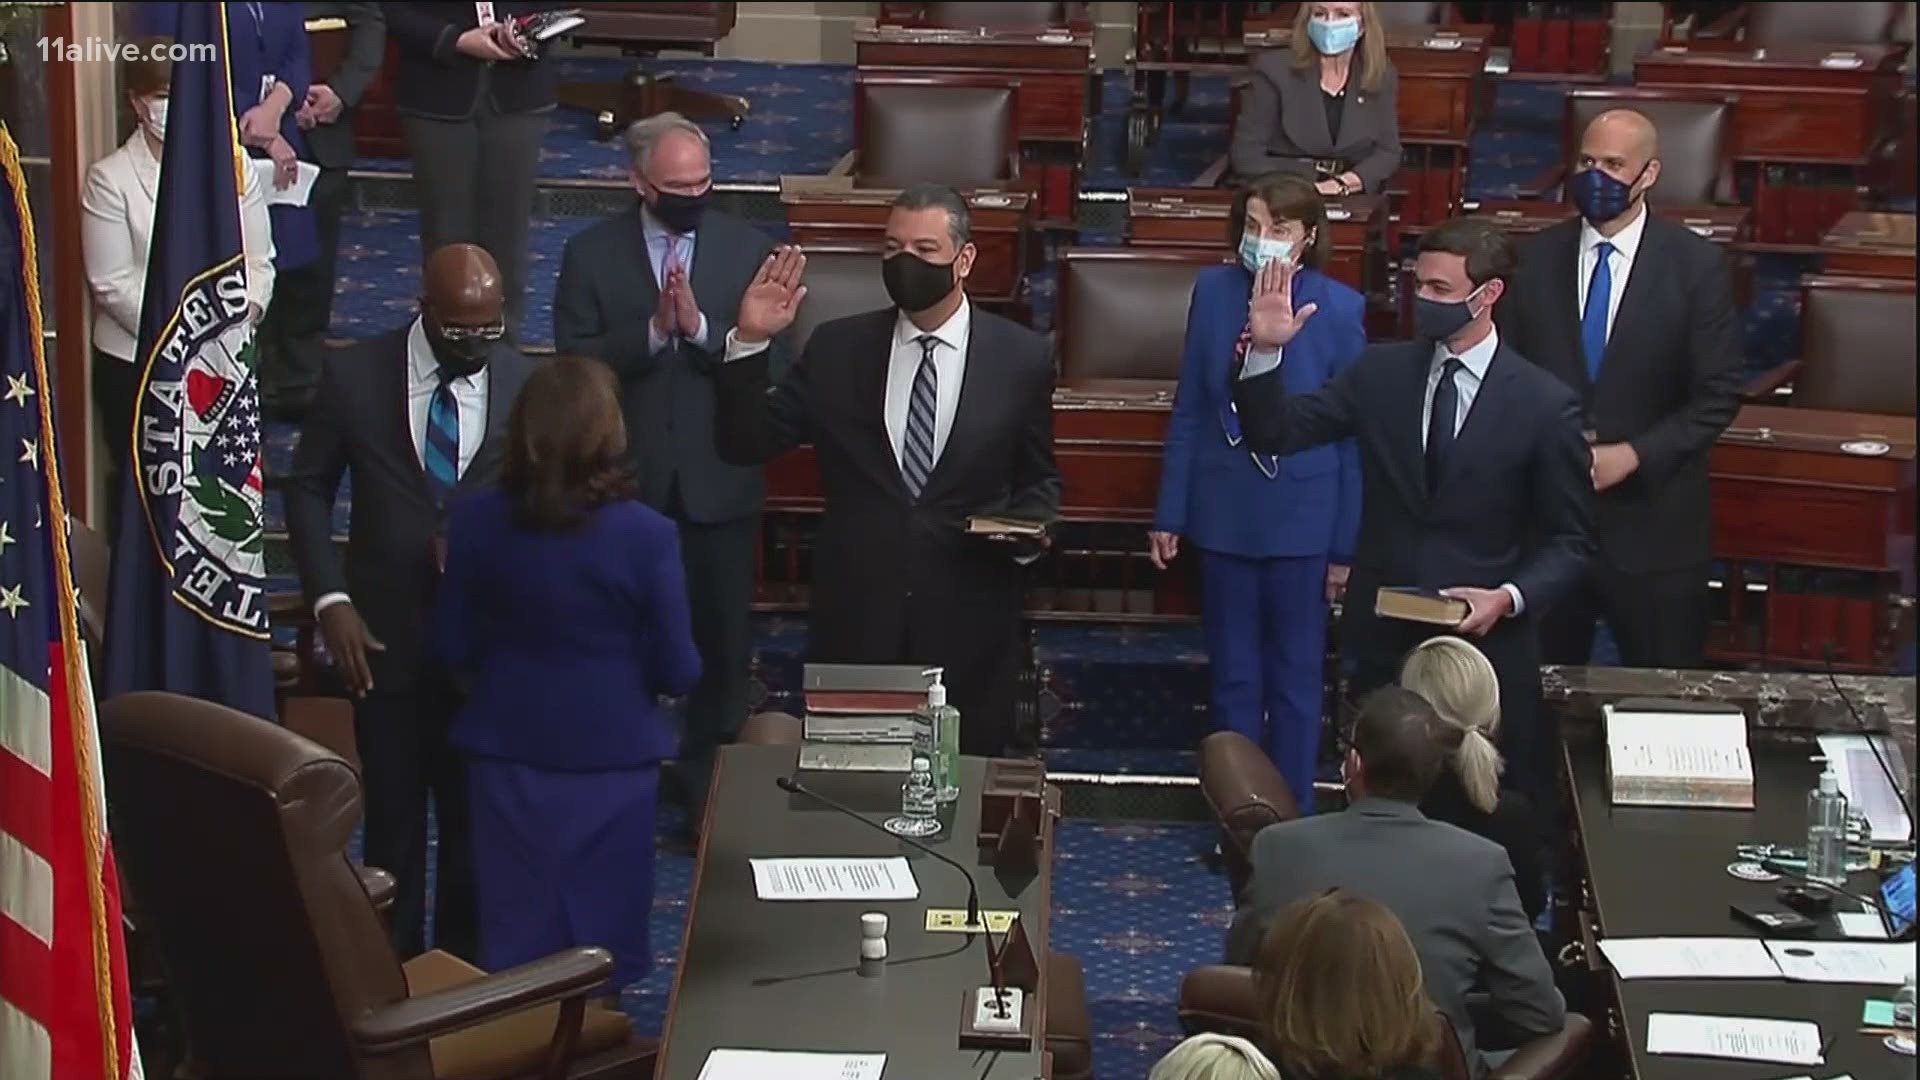 Democrats Jon Ossoff and Raphael Warnock - both history-making candidates - took their oaths of office Wednesday.